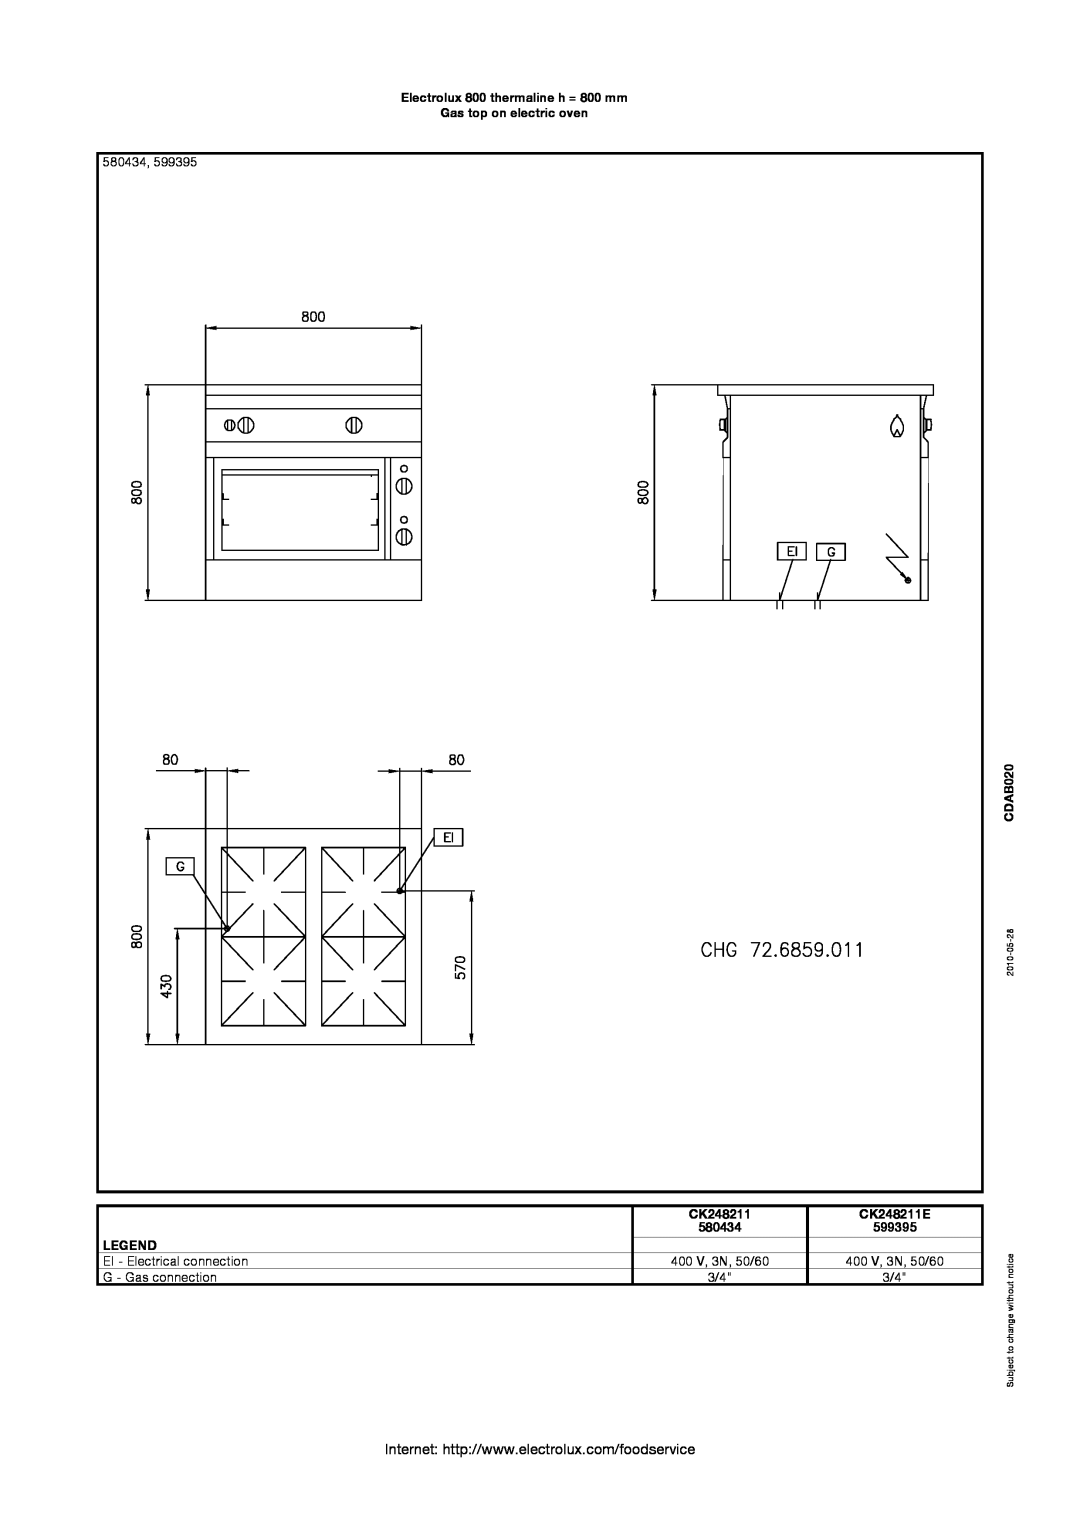 Electrolux manual CK248211E, Electrolux 800 thermaline h = 800 mm Gas top on electric oven, CDAB020, 580434, 599395 